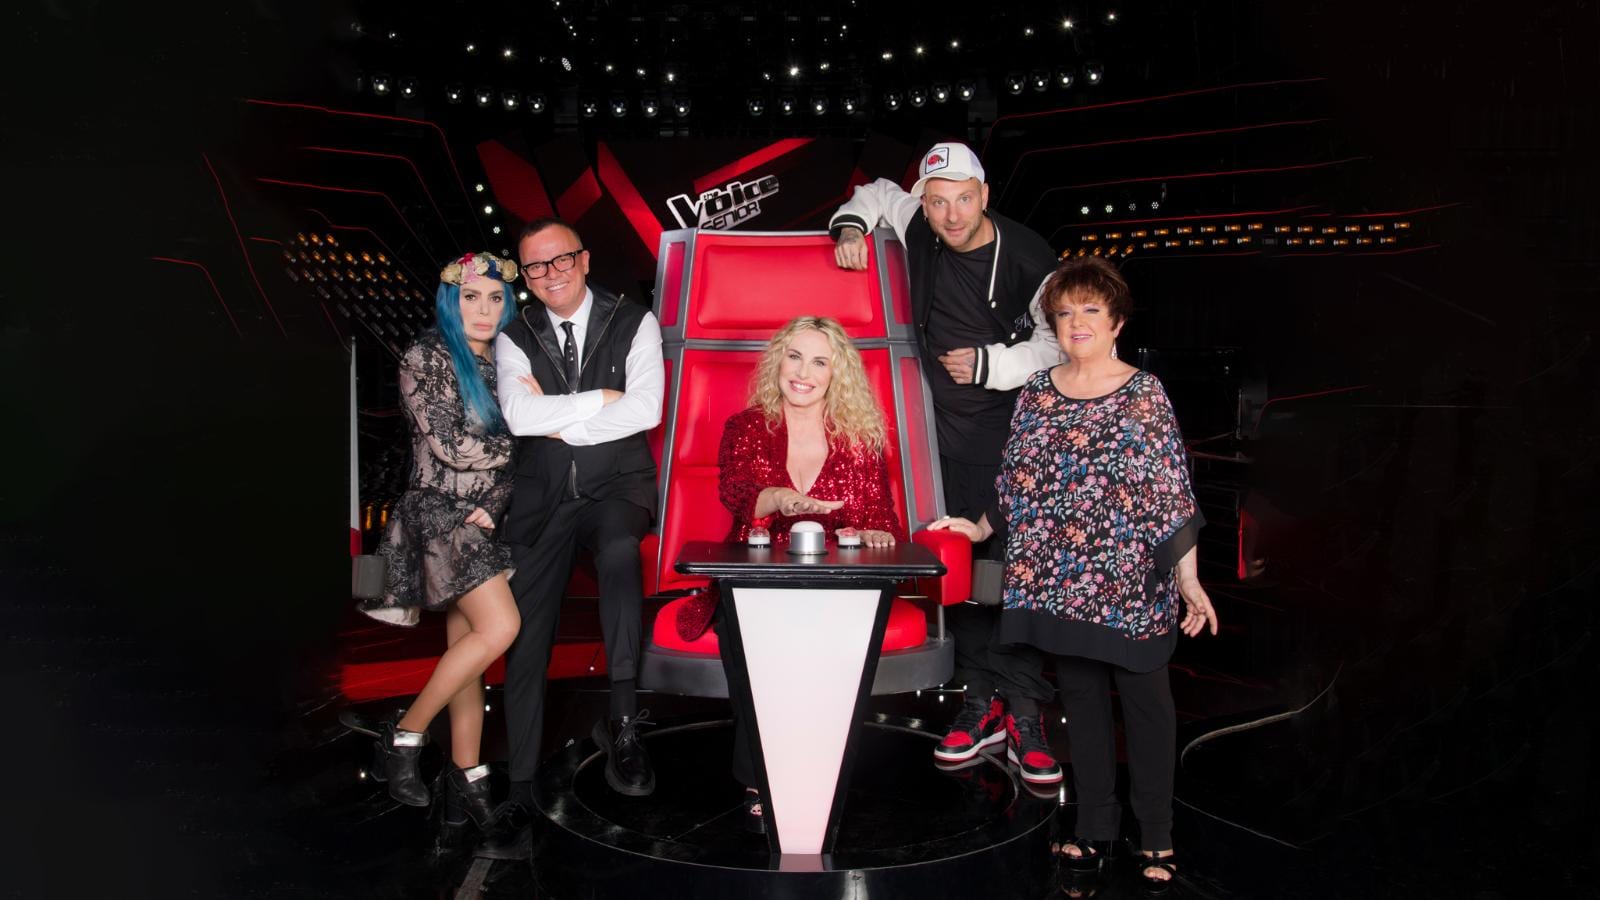 Stasera in TV: Nuove Blind Auditions a "The Voice Senior" Stasera in TV: Nuove Blind Auditions a "The Voice Senior"